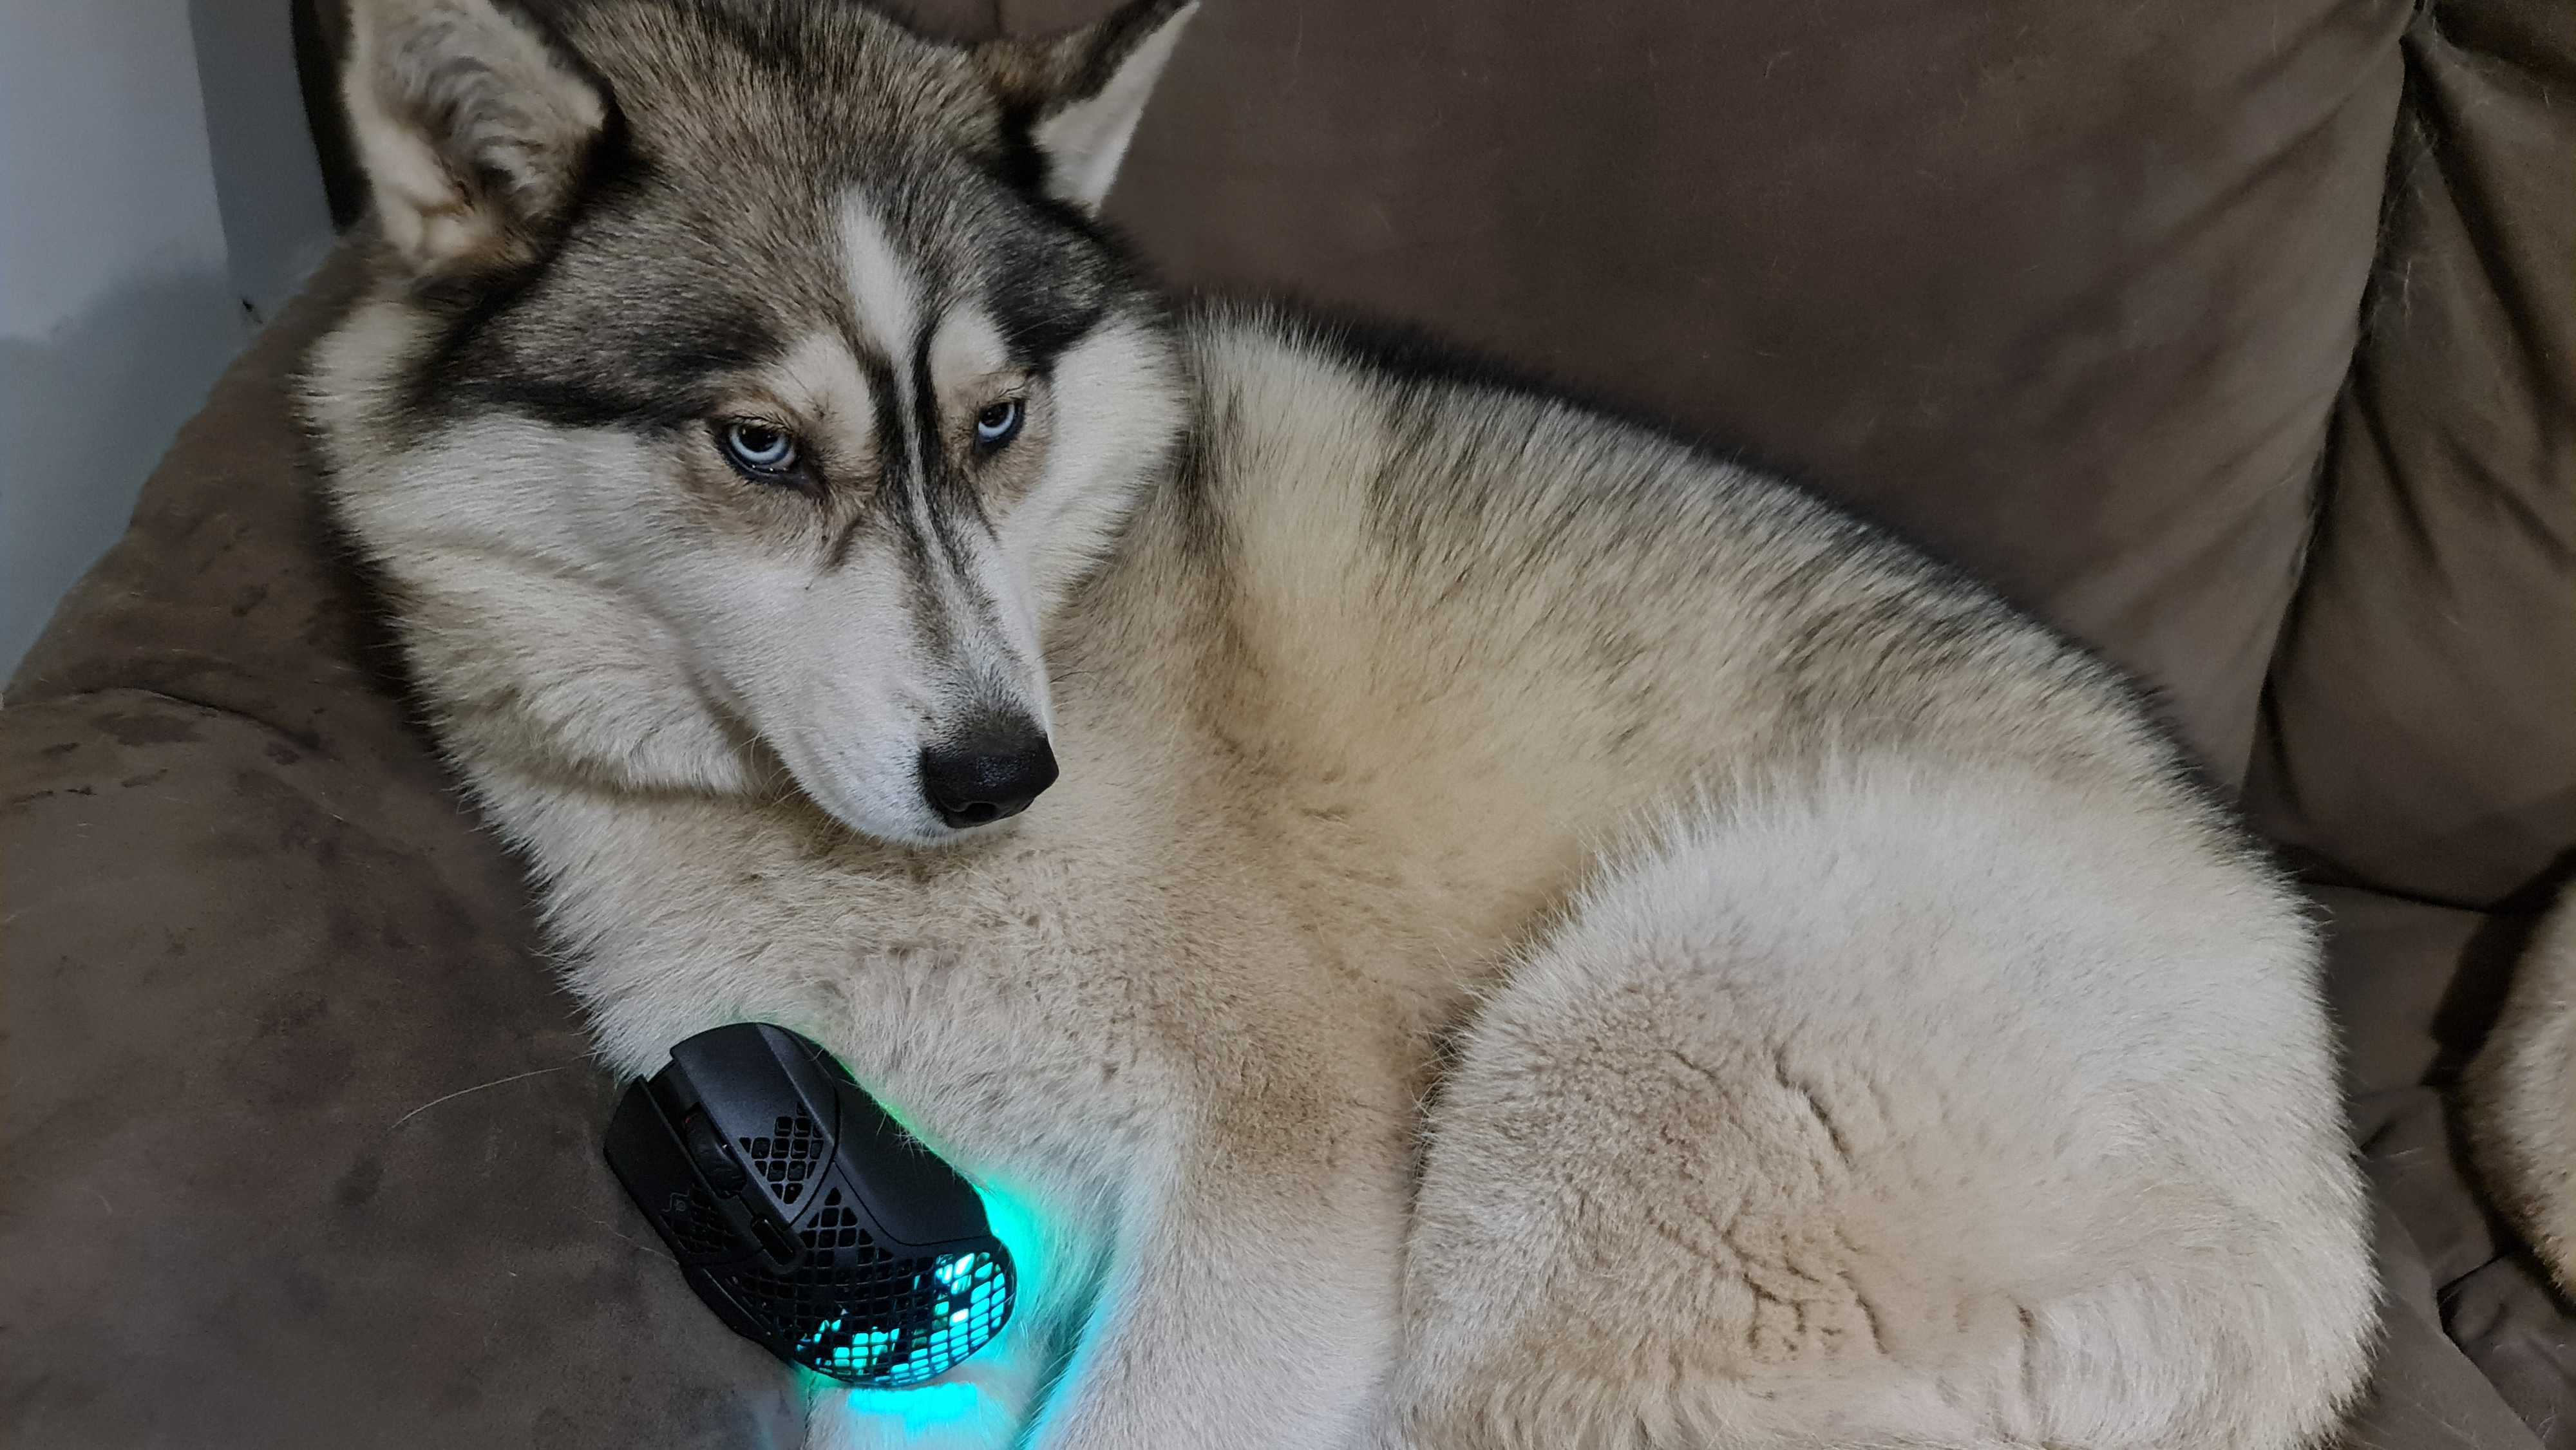 HyperX Aerox 5 gaming mouse with RGB lighting enabled on a dog.